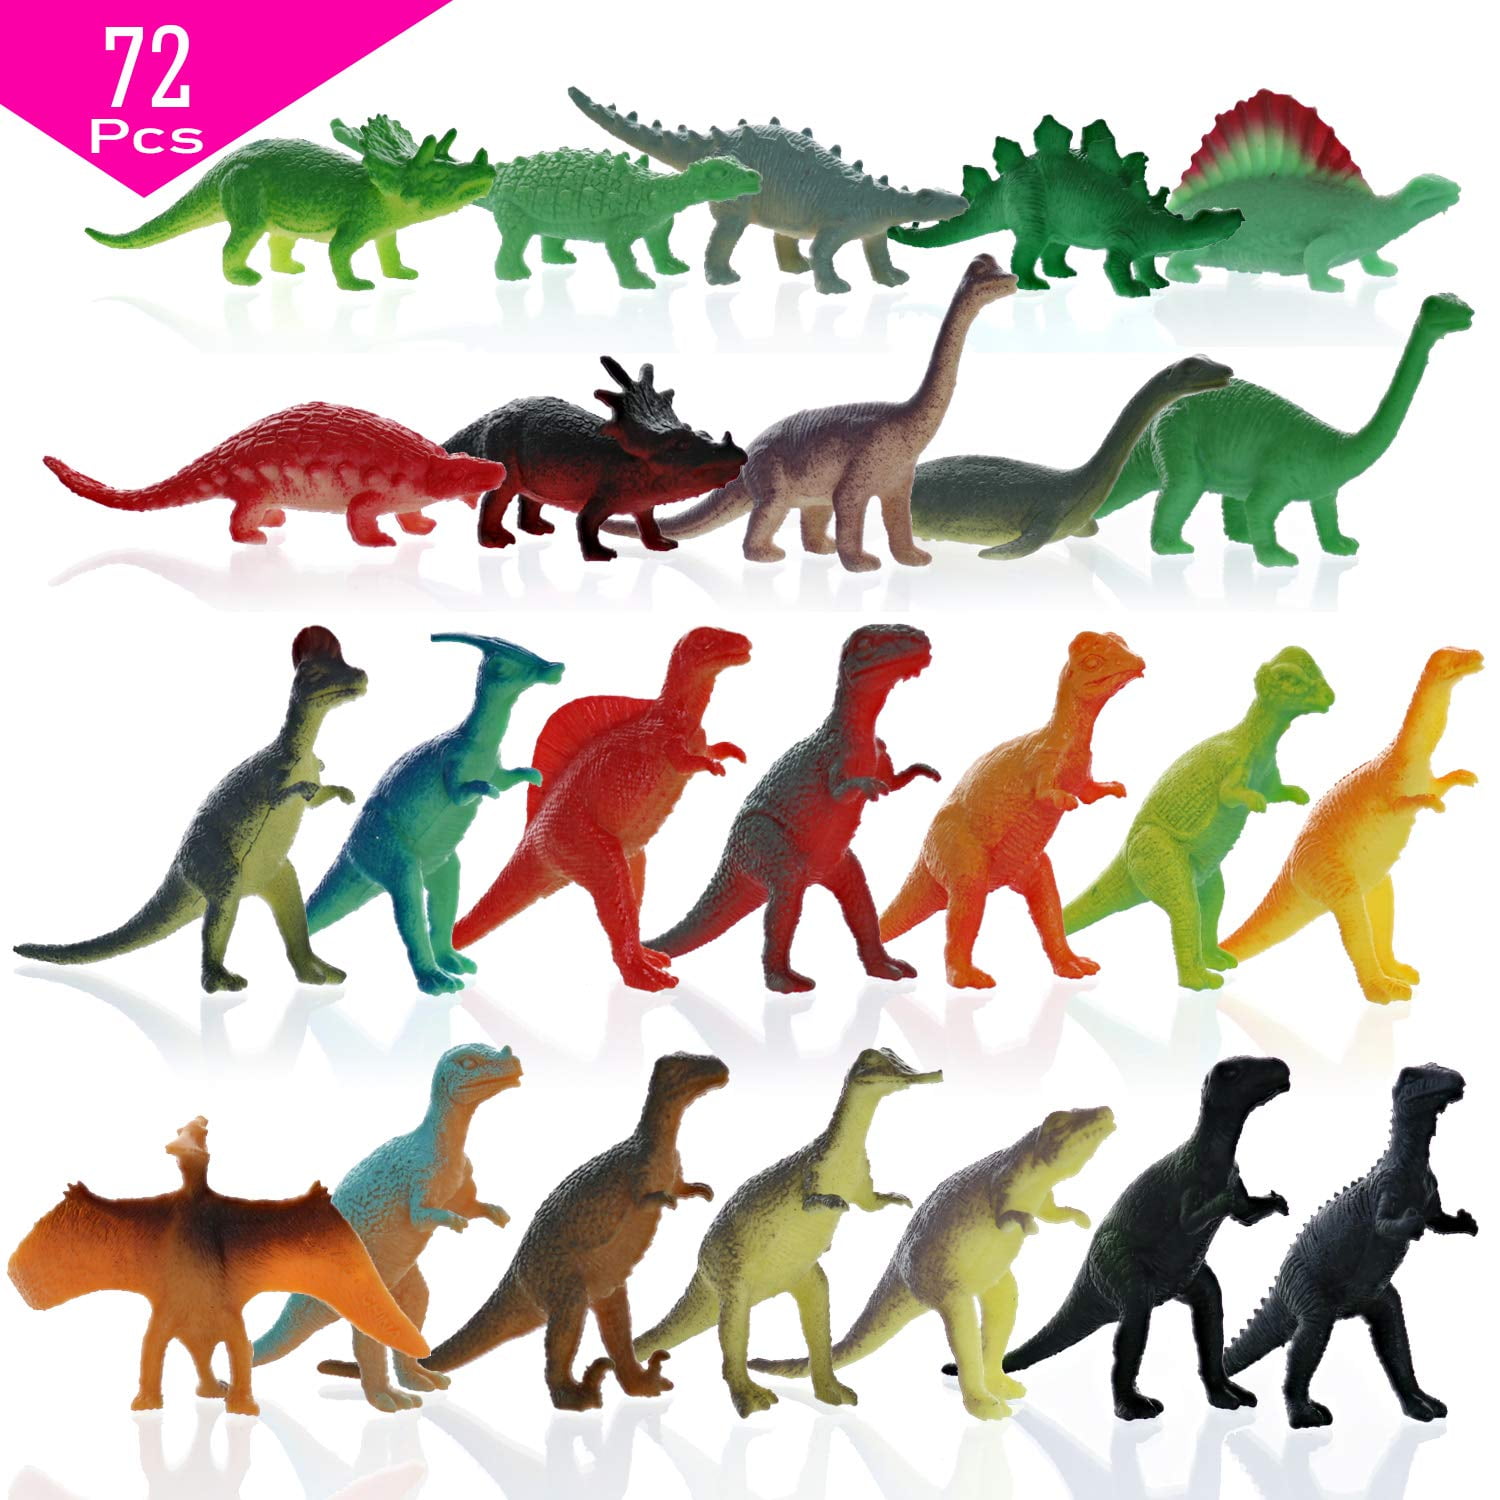 90 Pieces Mini Dinosaur Animals Figure Educational Learning Party Favors Toys 